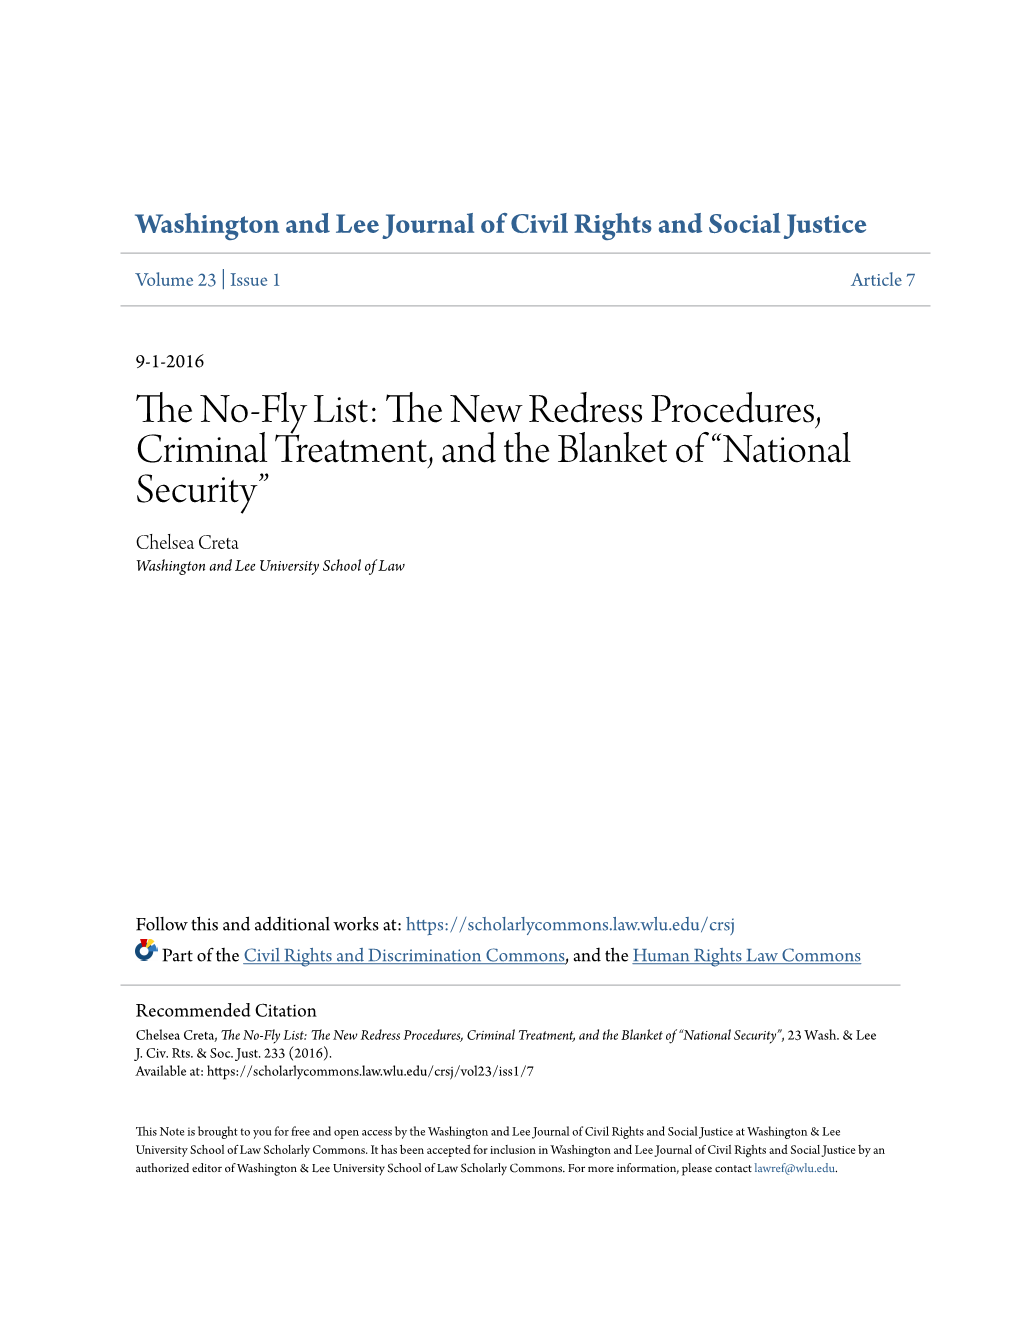 The No-Fly List: the New Redress Procedures, Criminal Treatment, and the Blanket of “National Security”, 23 Wash